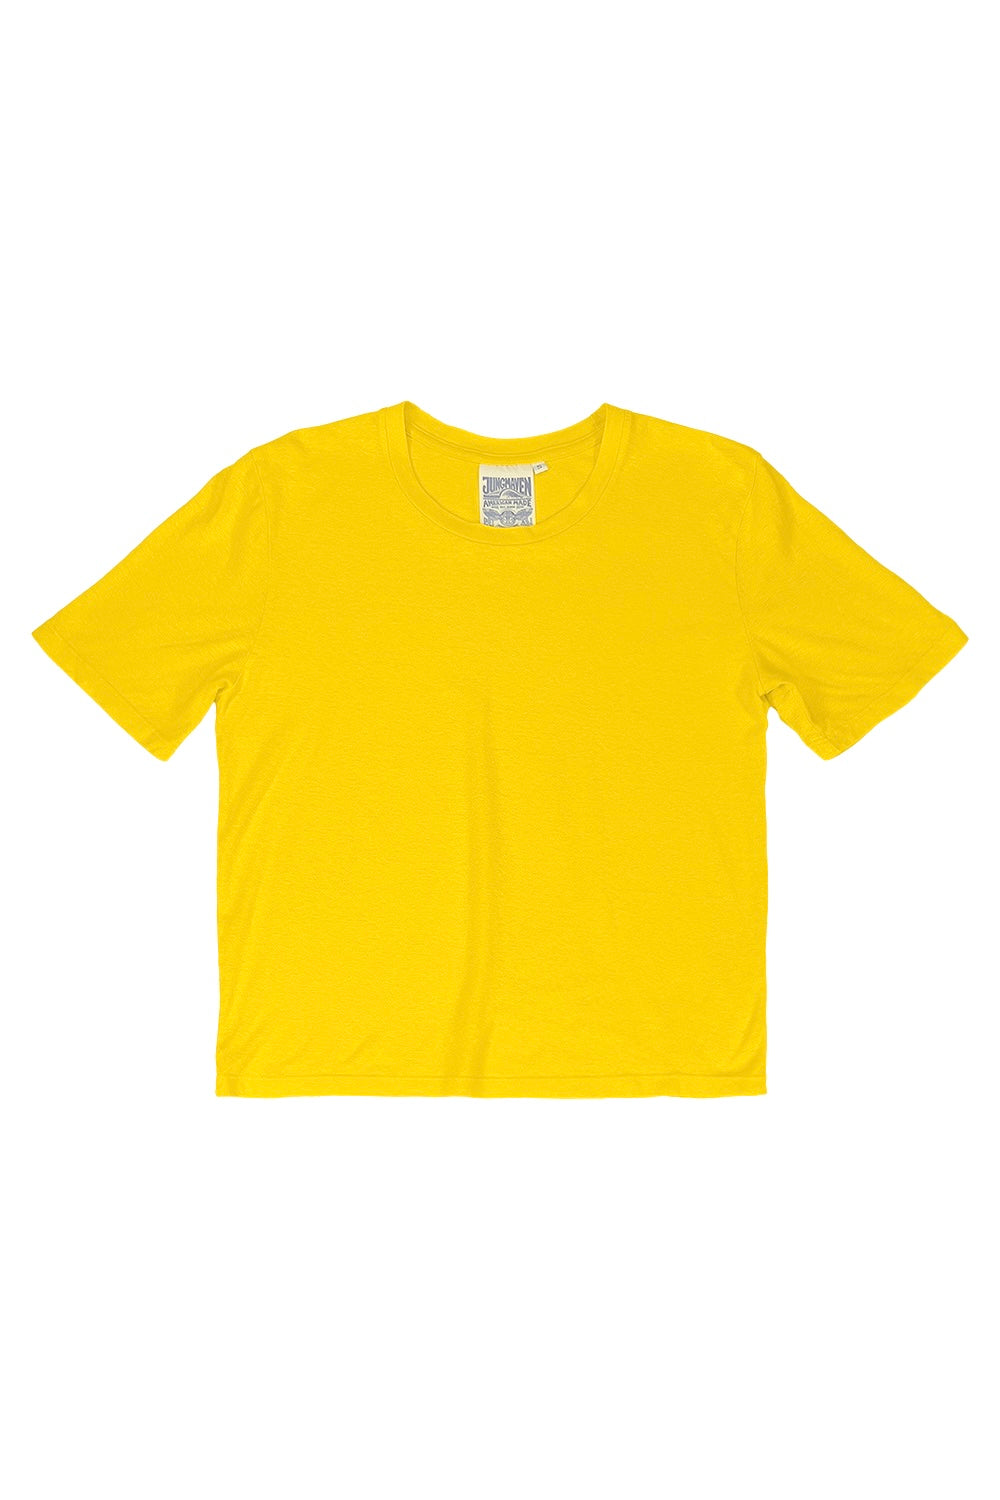 Silverlake Cropped Tee | Jungmaven Hemp Clothing & Accessories / Color: Sunshine Yellow